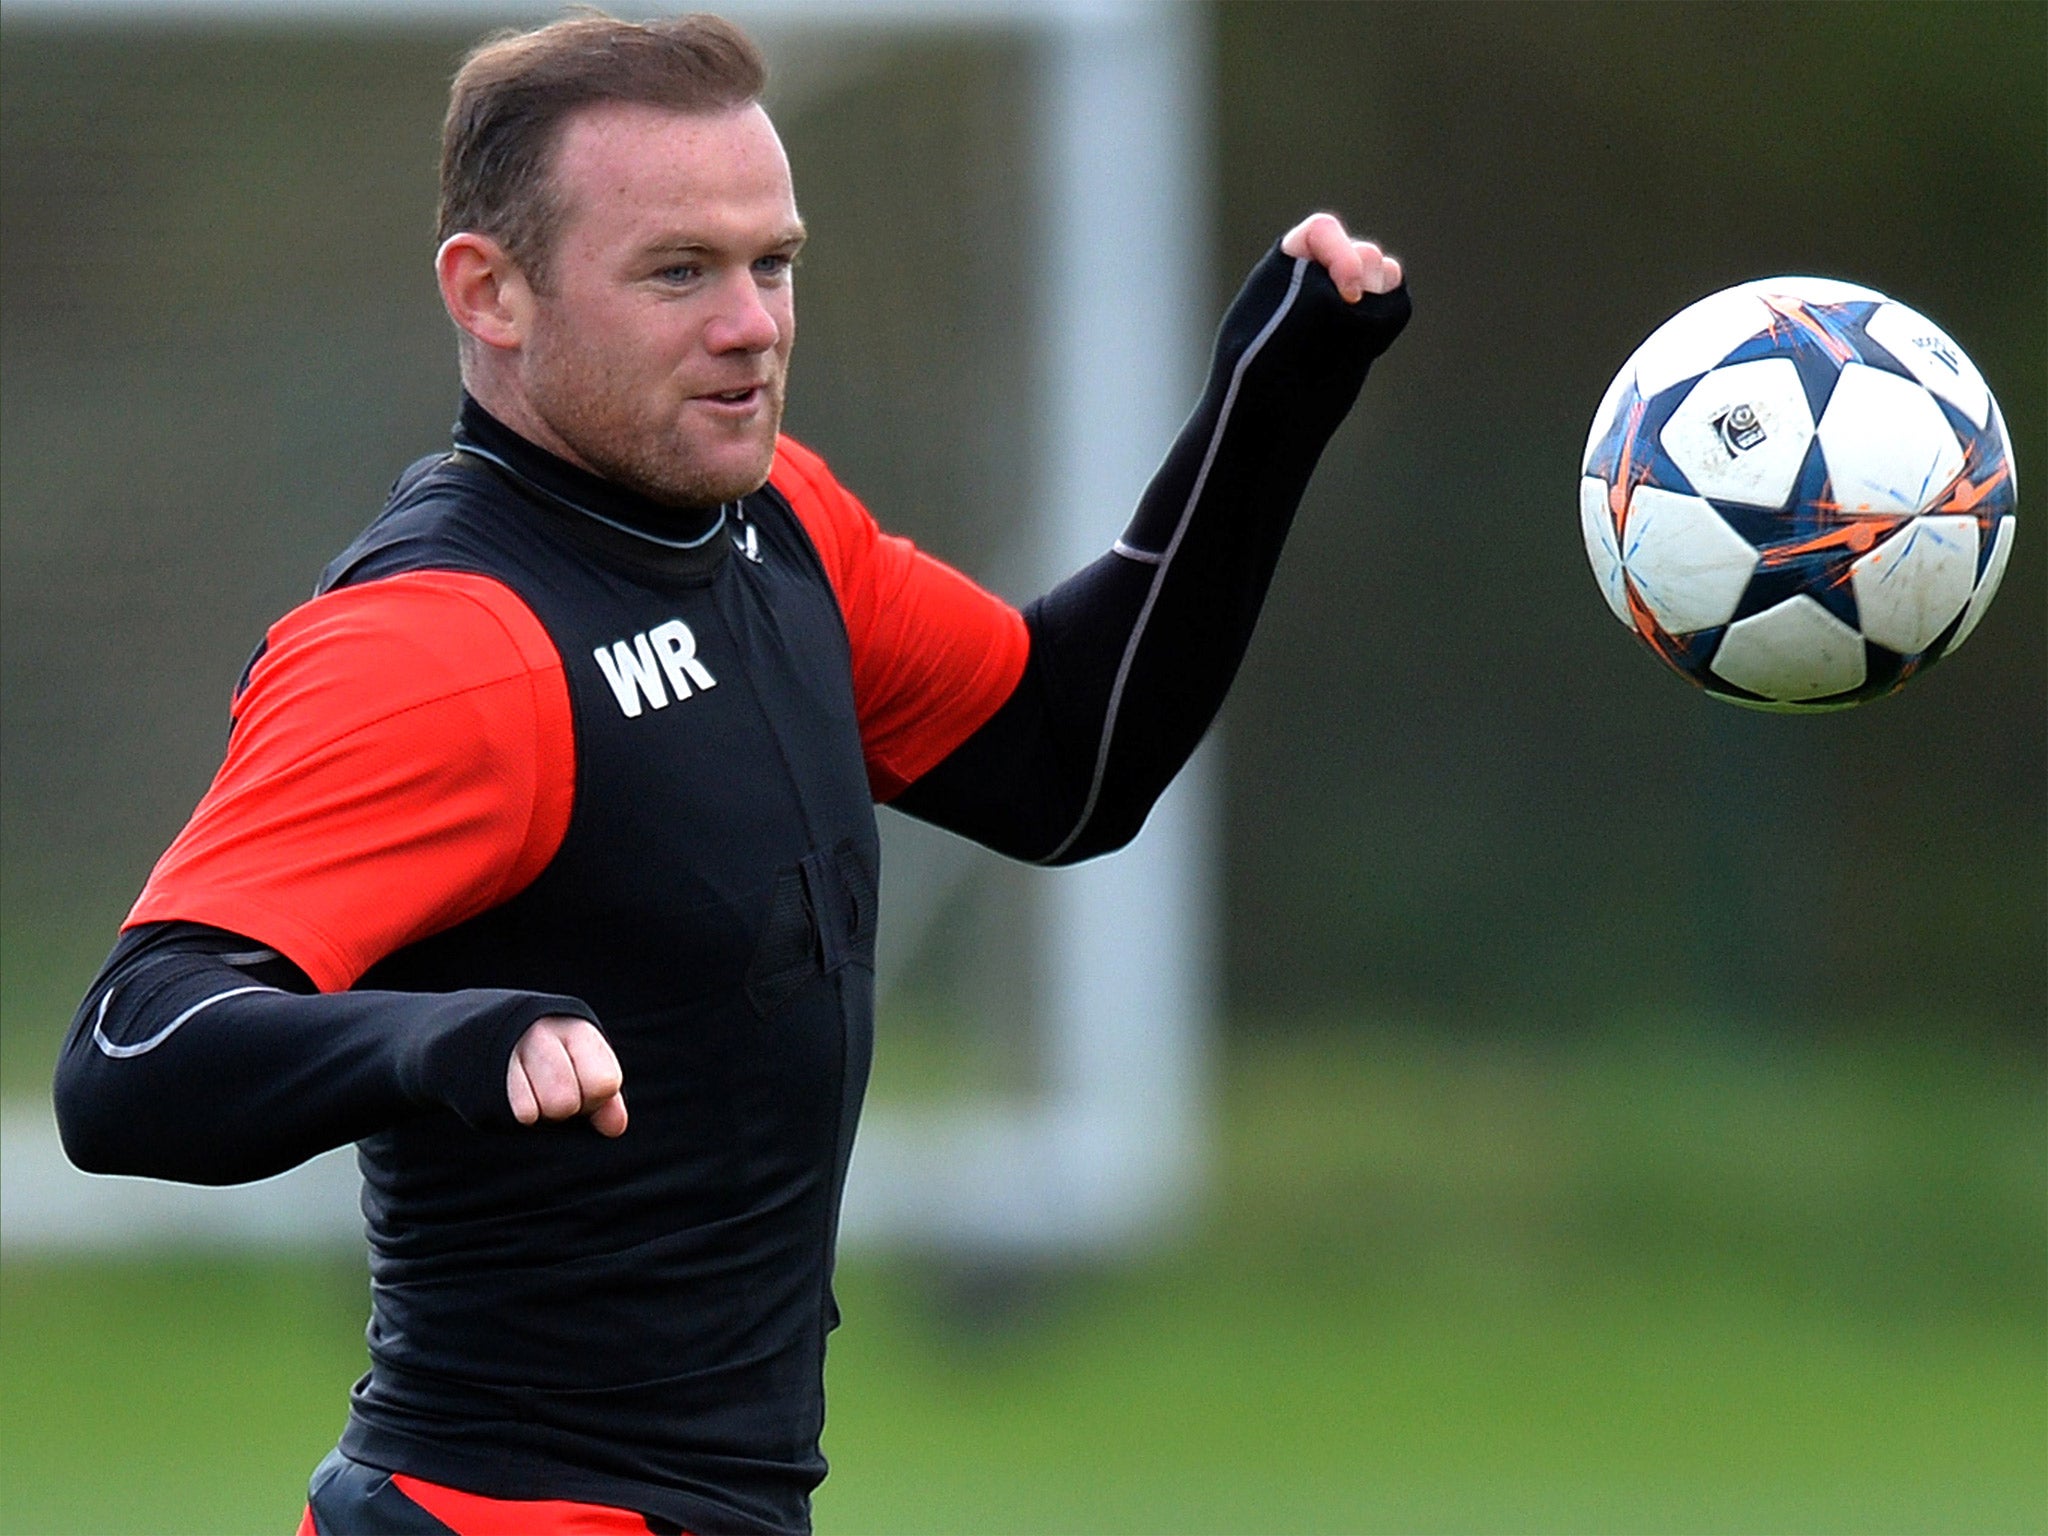 Wayne Rooney is expected to start against Bayern